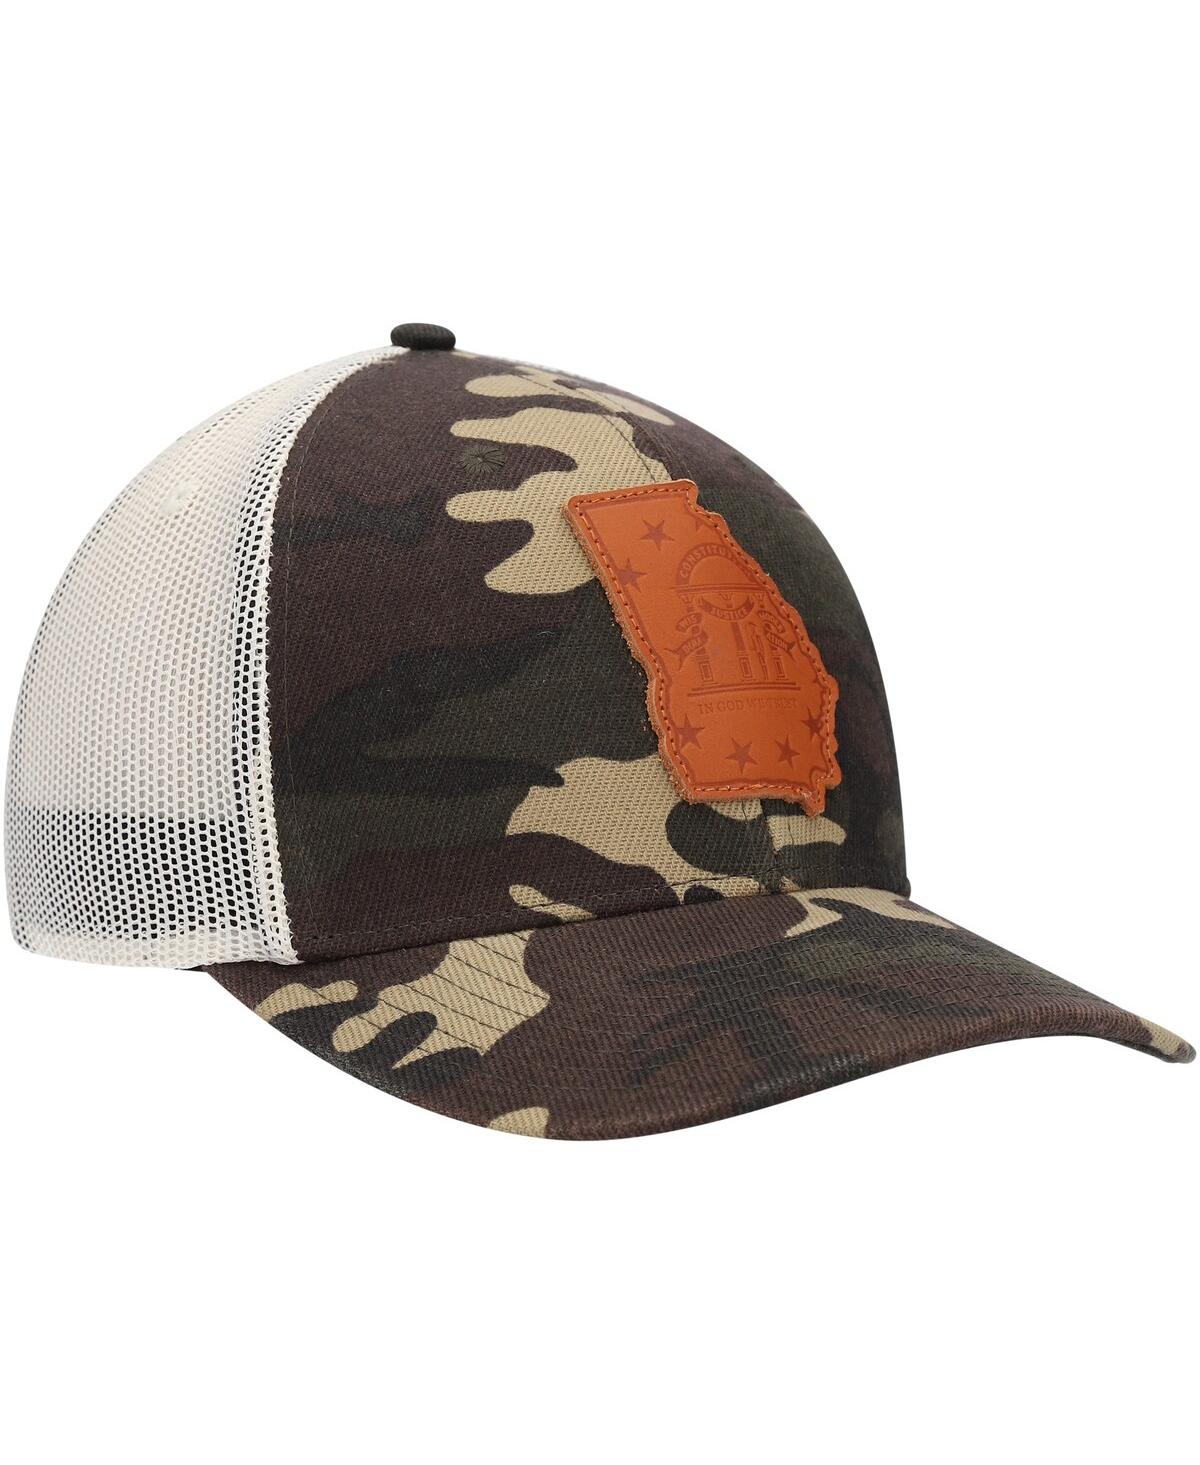 Shop Local Crowns Men's  Camo Georgia Icon Woodland State Patch Trucker Snapback Hat